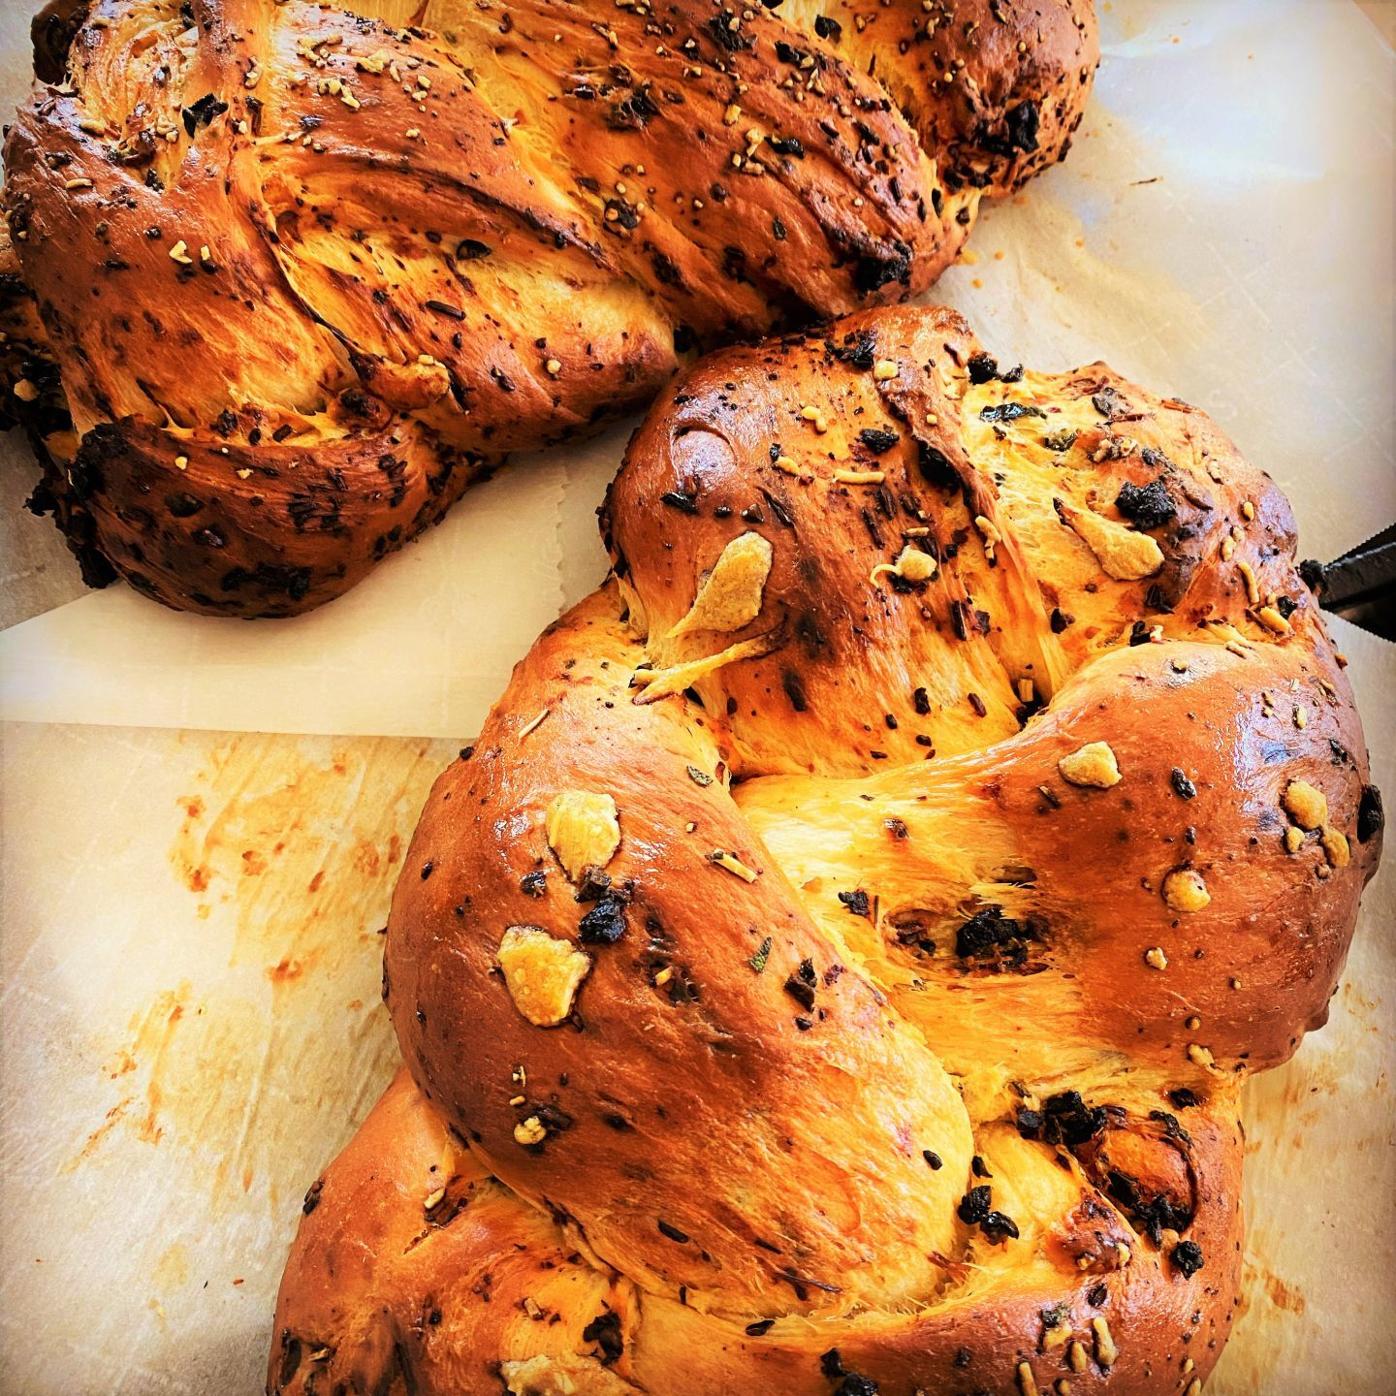 Belle’s Sundried Tomato, Olive and Herb Bread